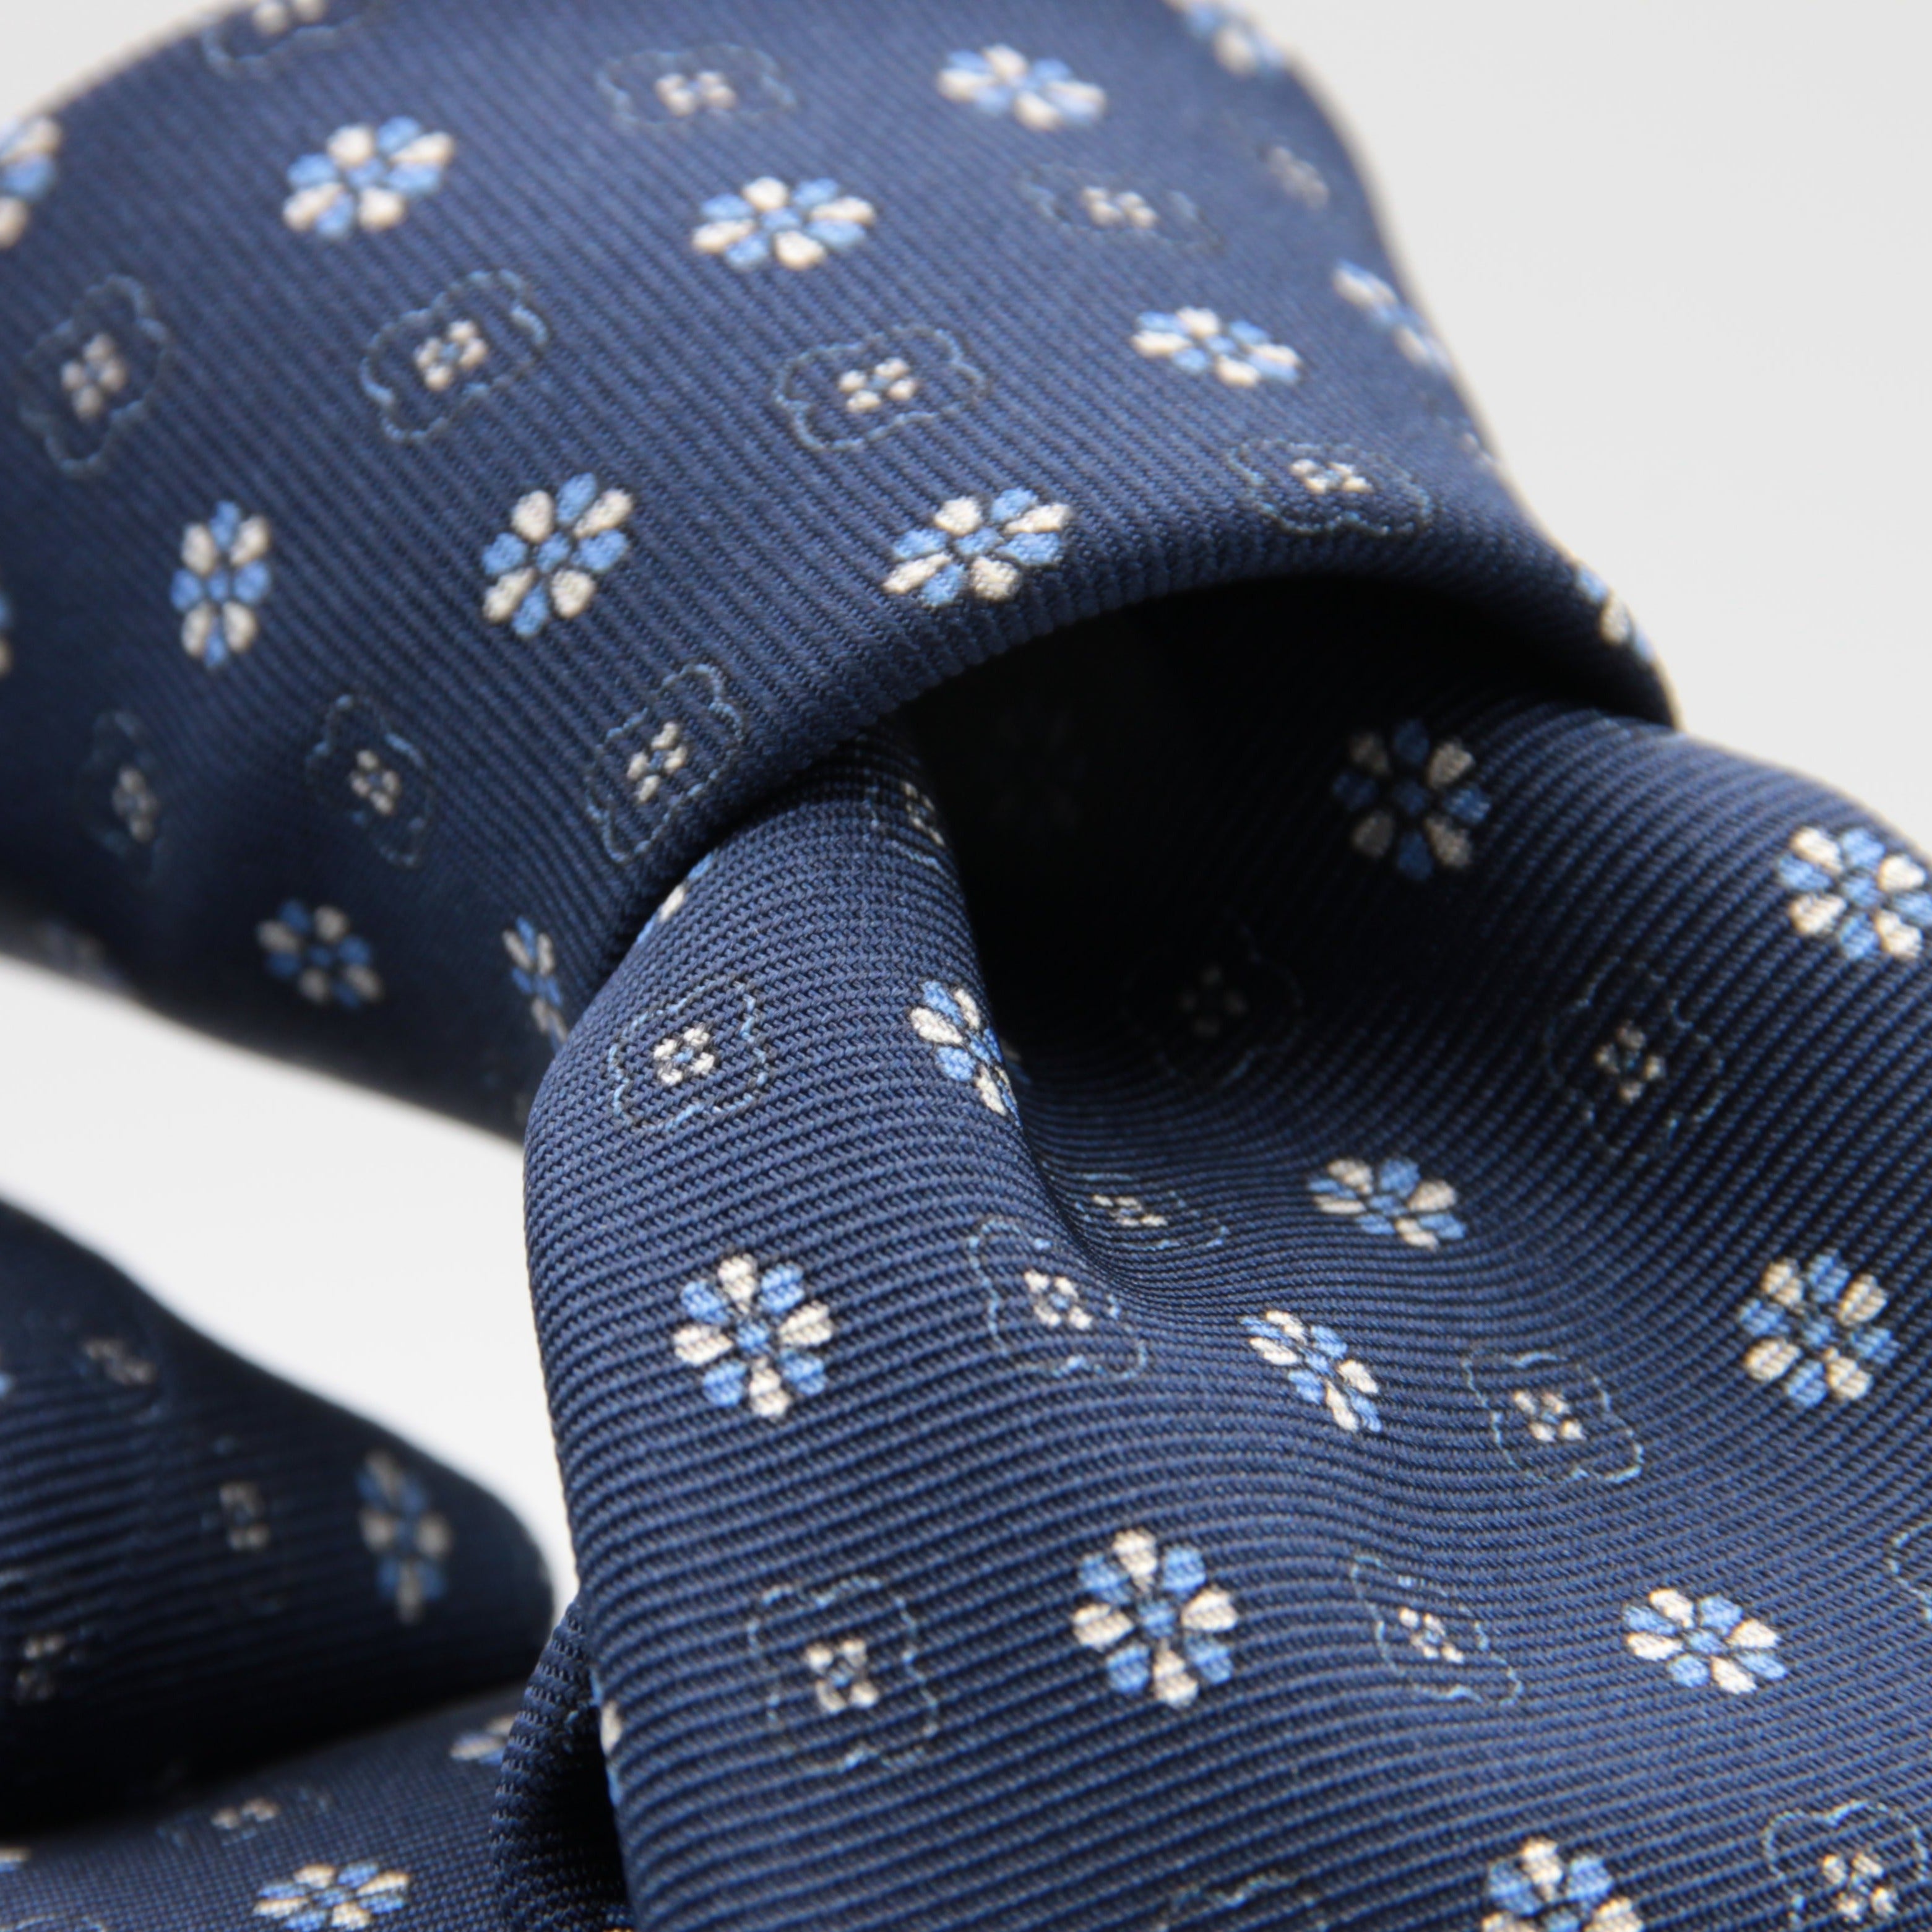 Holliday & Brown for Cruciani & Bella 100% printed Silk Self tipped Blue, Light Blue and White motif tie Handmade in Italy 8 cm x 150 cm #6978